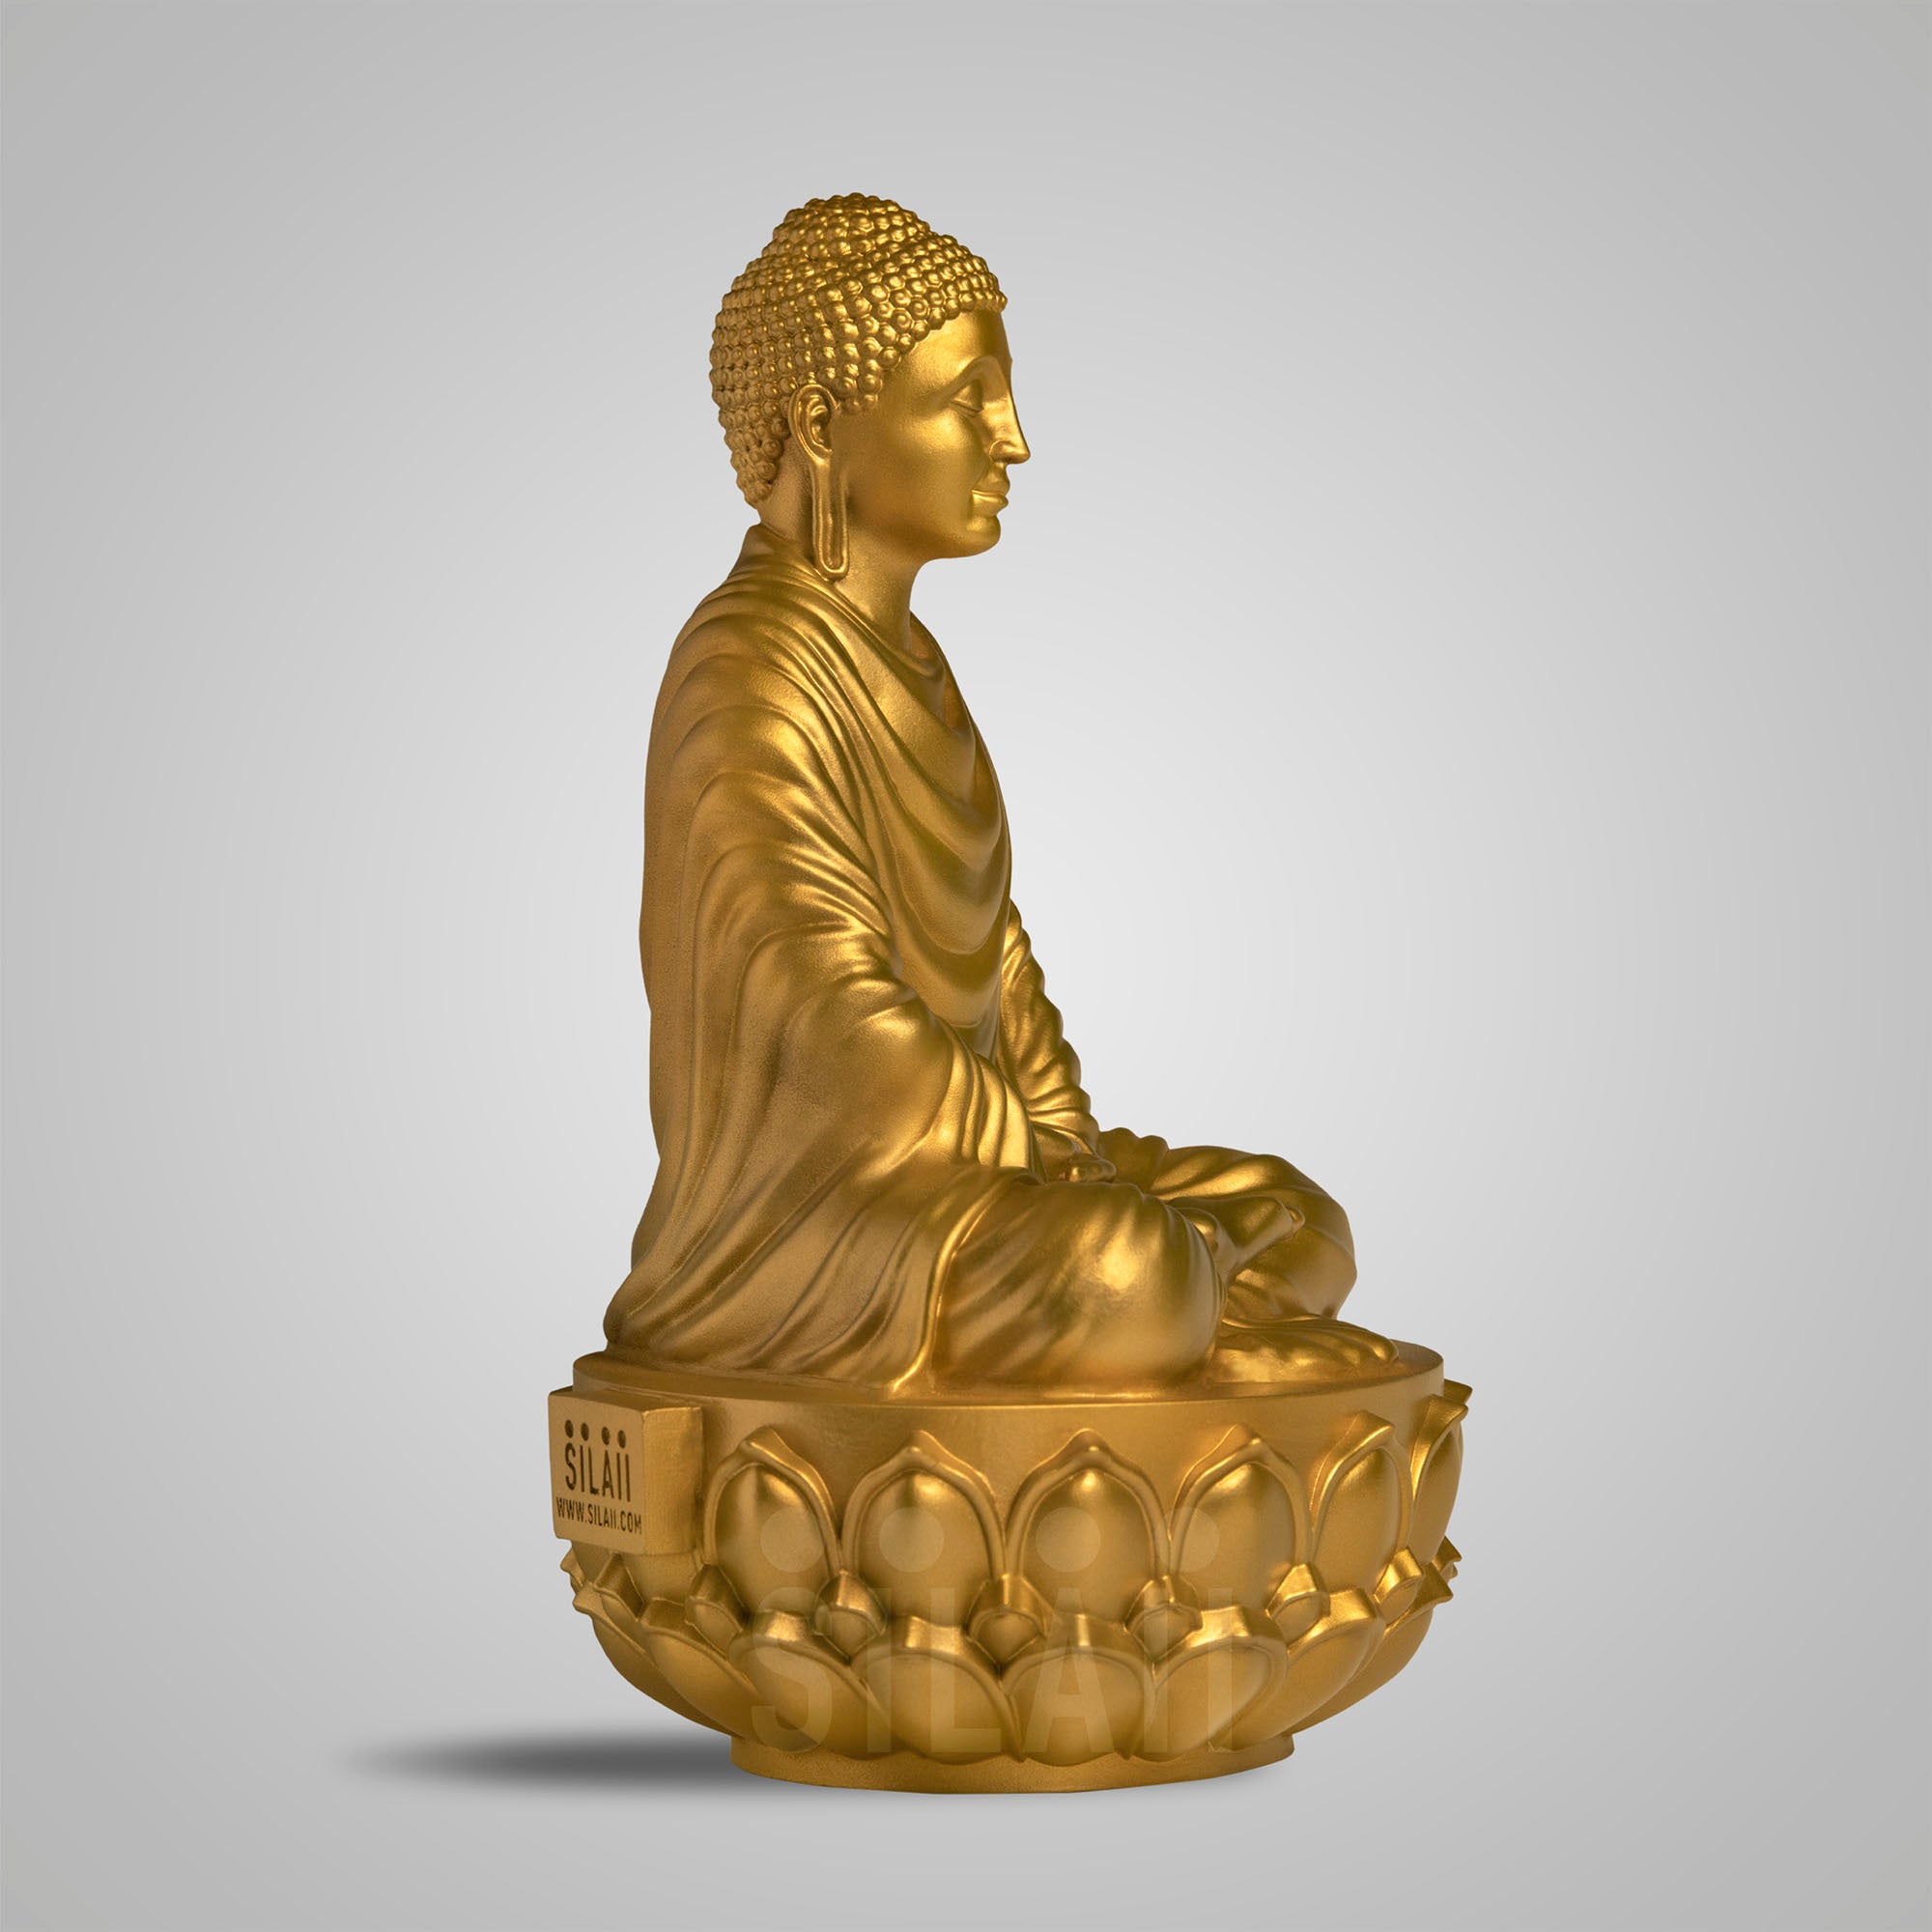 Gautama Buddha Sculpture and Statue for your Home Decor and Garden | Buy  Now